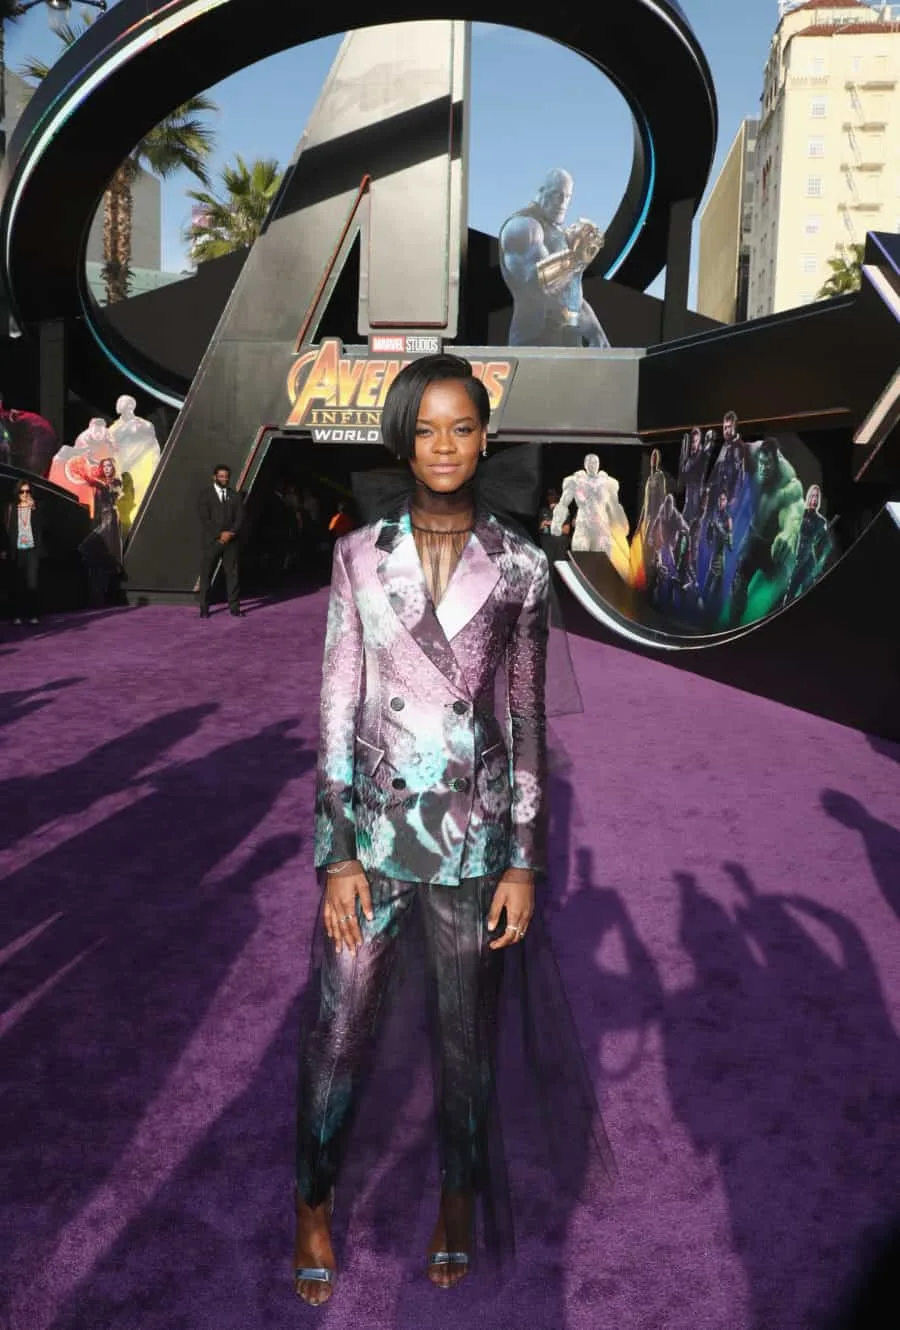 HOLLYWOOD, CA - APRIL 23:  Letitia Wright attends the Los Angeles Global Premiere for Marvel Studios Avengers: Infinity War on April 23, 2018 in Hollywood, California.  (Photo by Rich Polk/Getty Images for Disney) *** Local Caption *** Letitia Wright